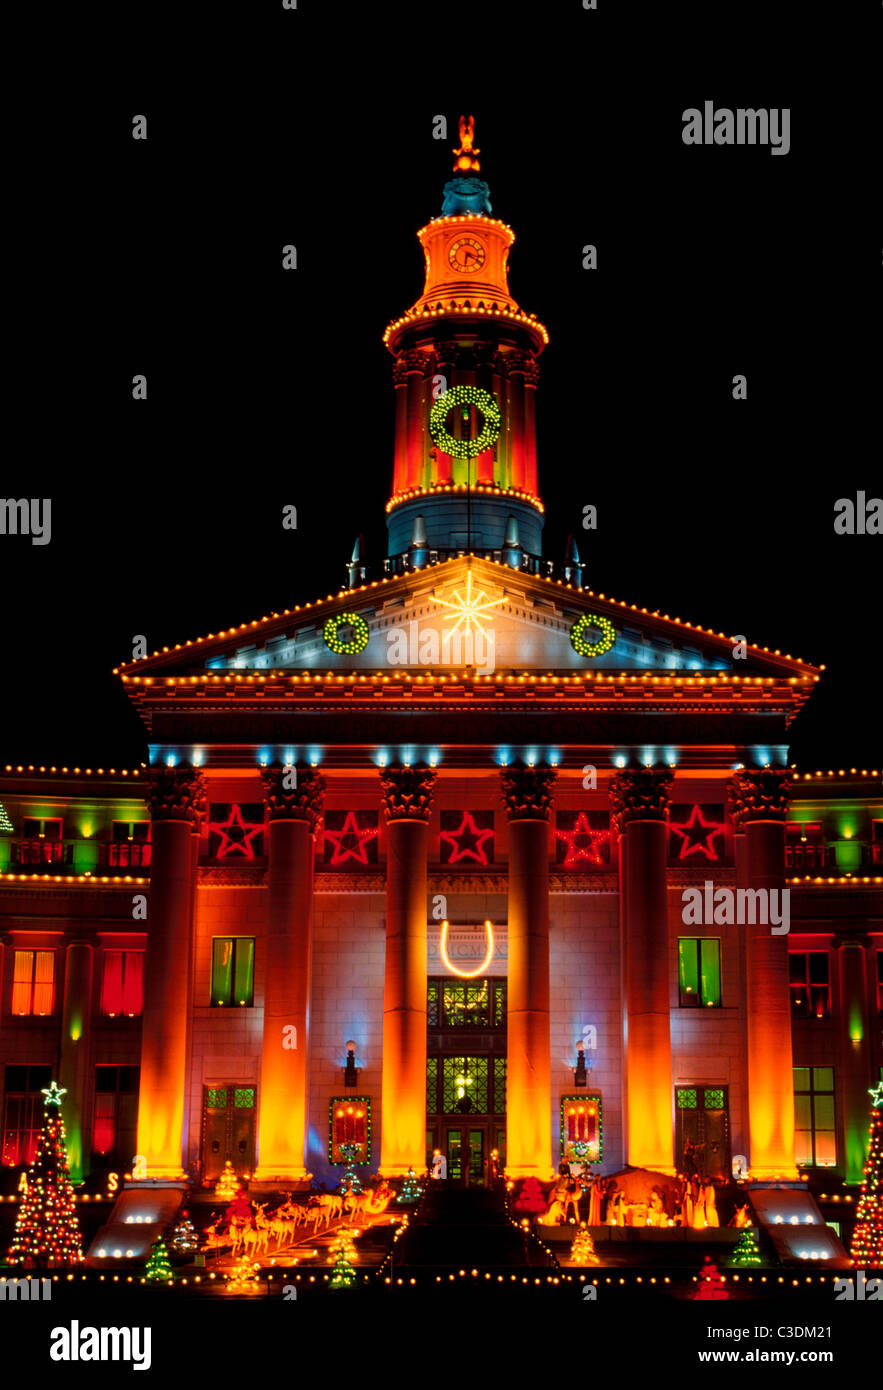 The annual display of bright Christmas lights on the Denver City and County Building has been a tradition in Colorado's Mile-High City since 1935. Stock Photo